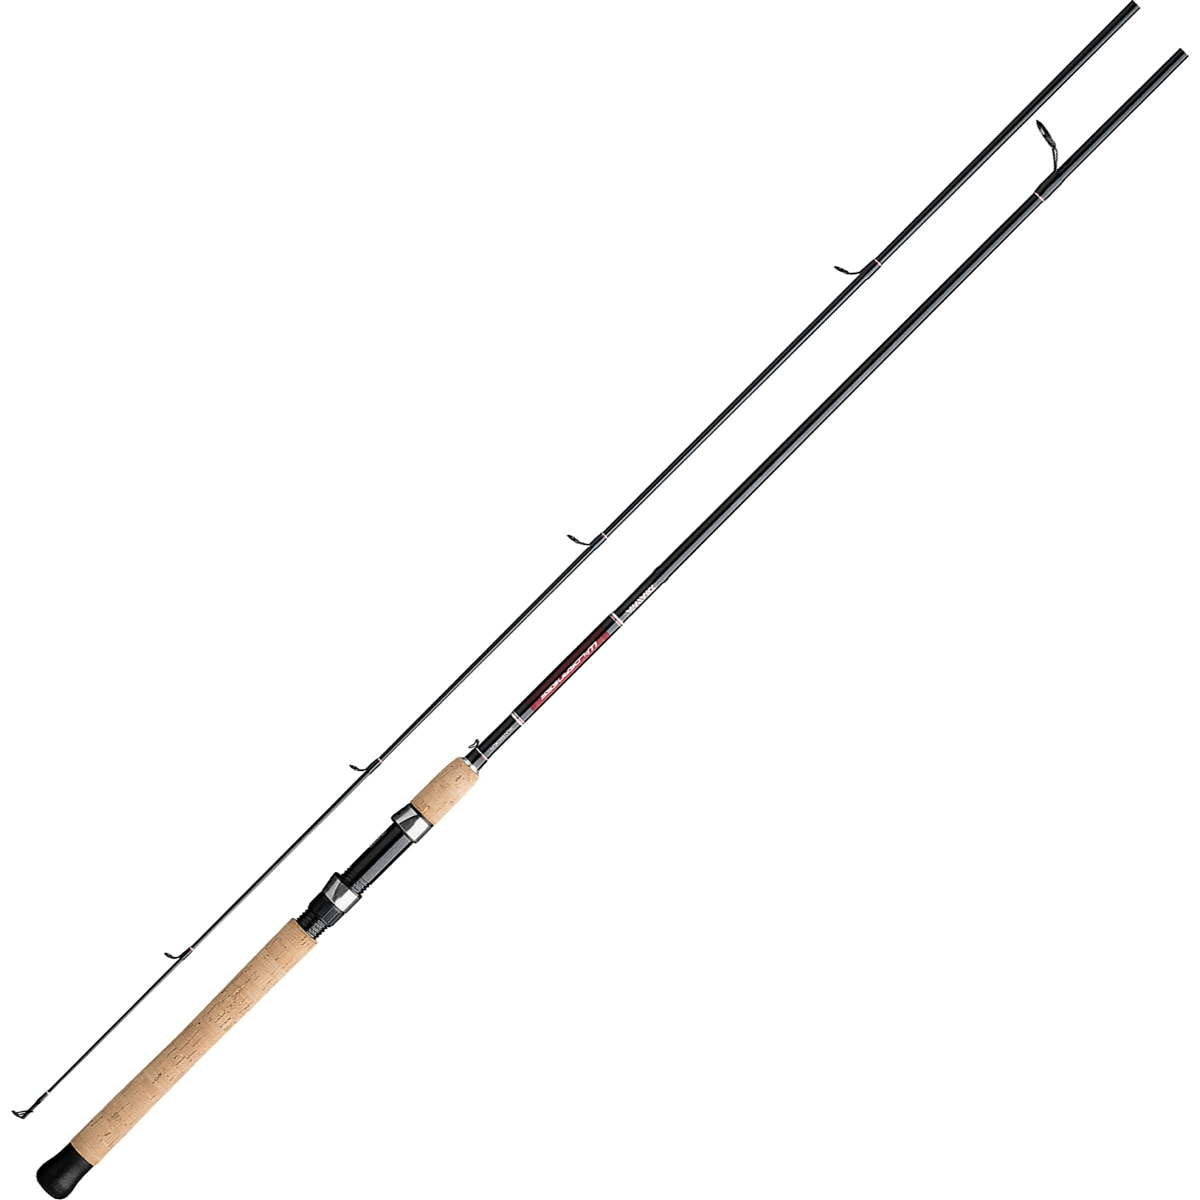 Photo of Daiwa Wilderness Salmon Steelhead Spinning Rod for sale at United Tackle Shops.